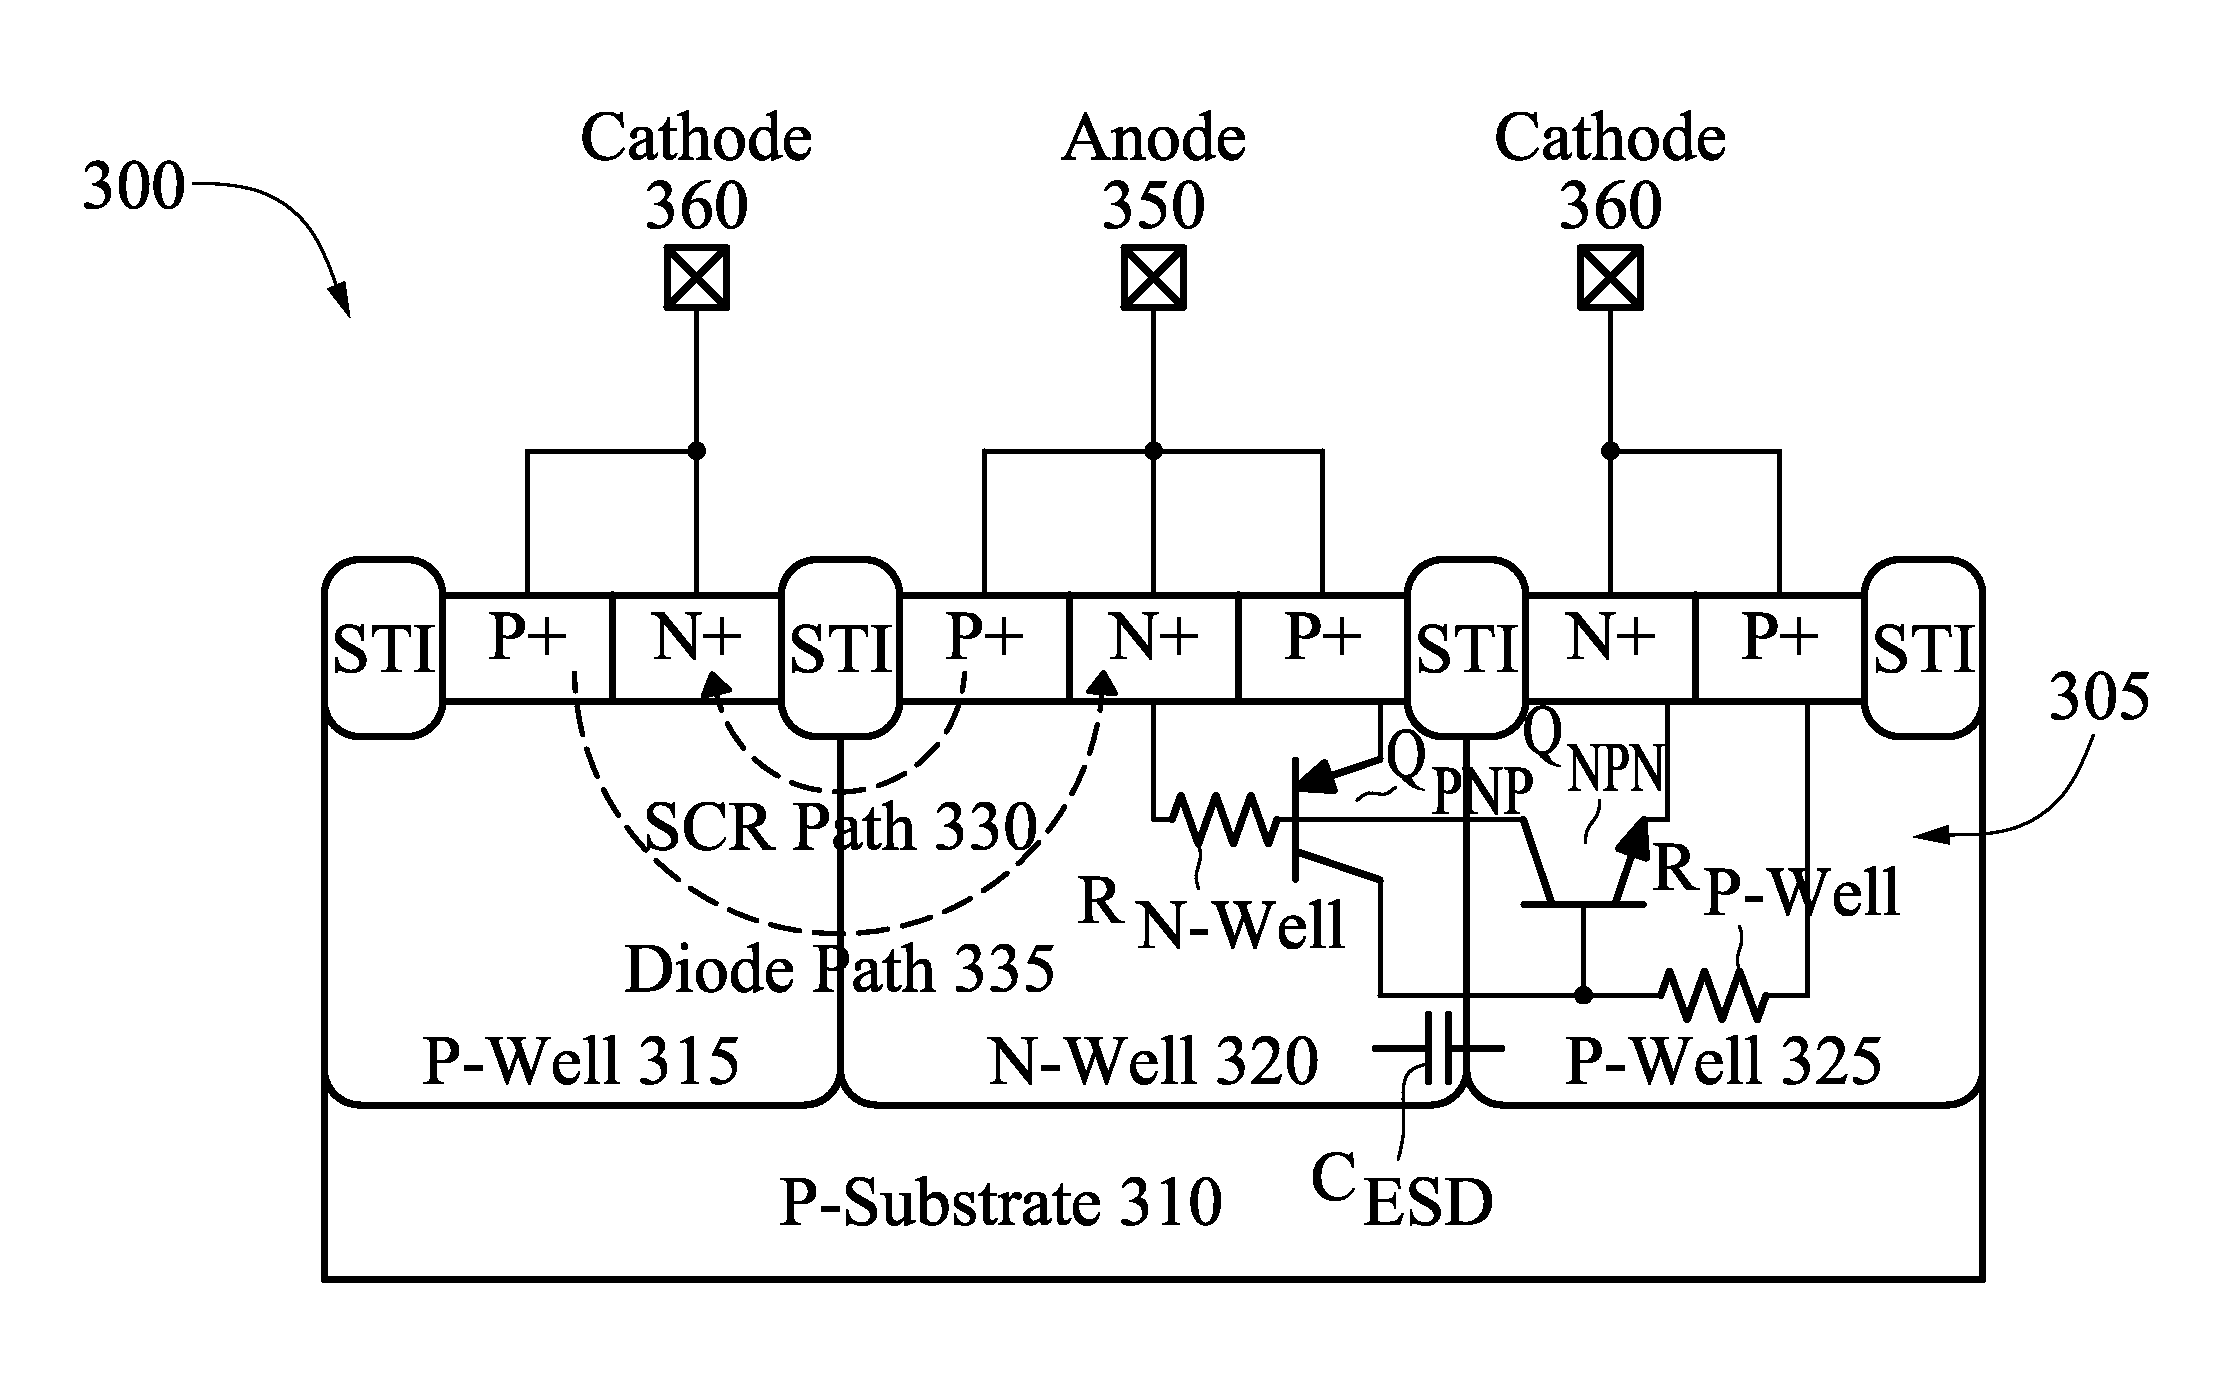 Electrostatic discharge circuit using inductor-triggered silicon-controlled rectifier